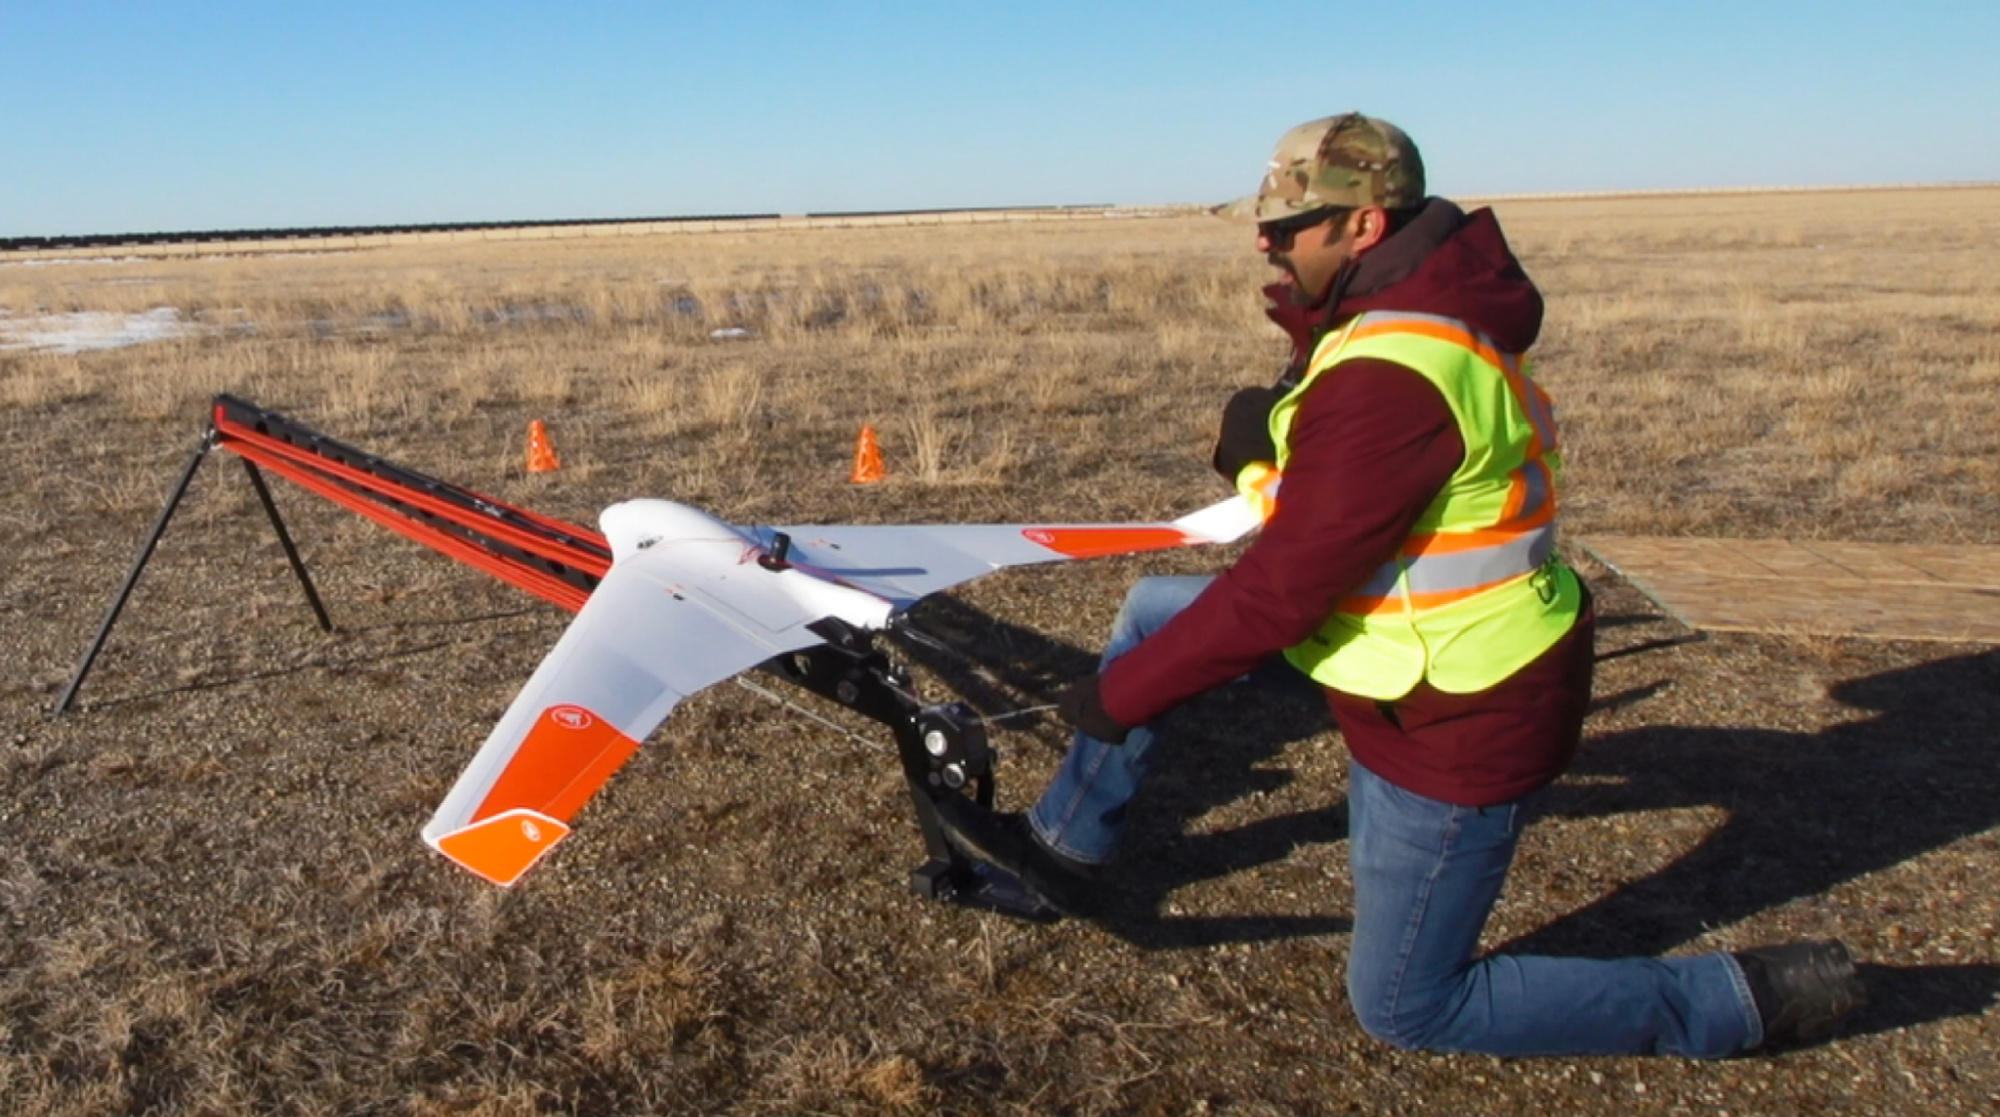 Winged drone is launched at the Foremost UAS Test Range.